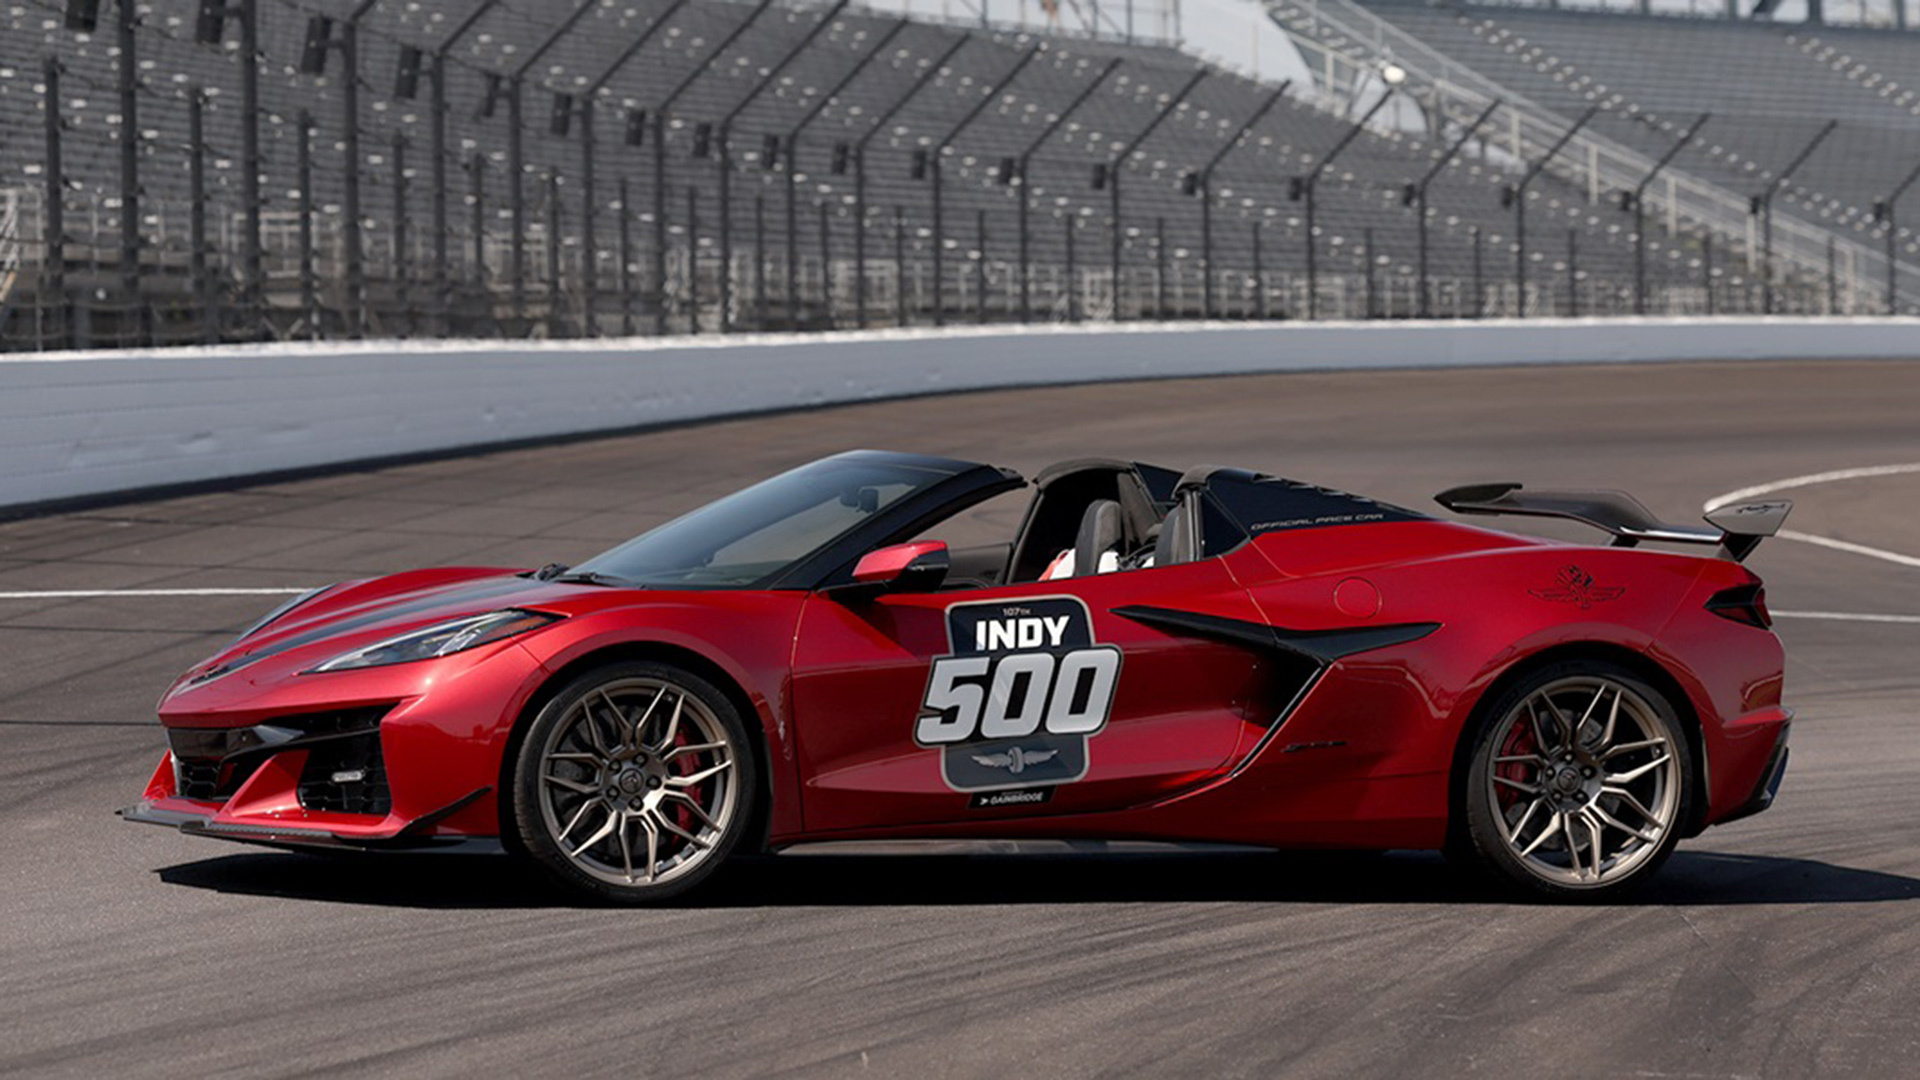 Chevy Corvette Z06 Convertible Will Be Pacing This Month’s Indy 500